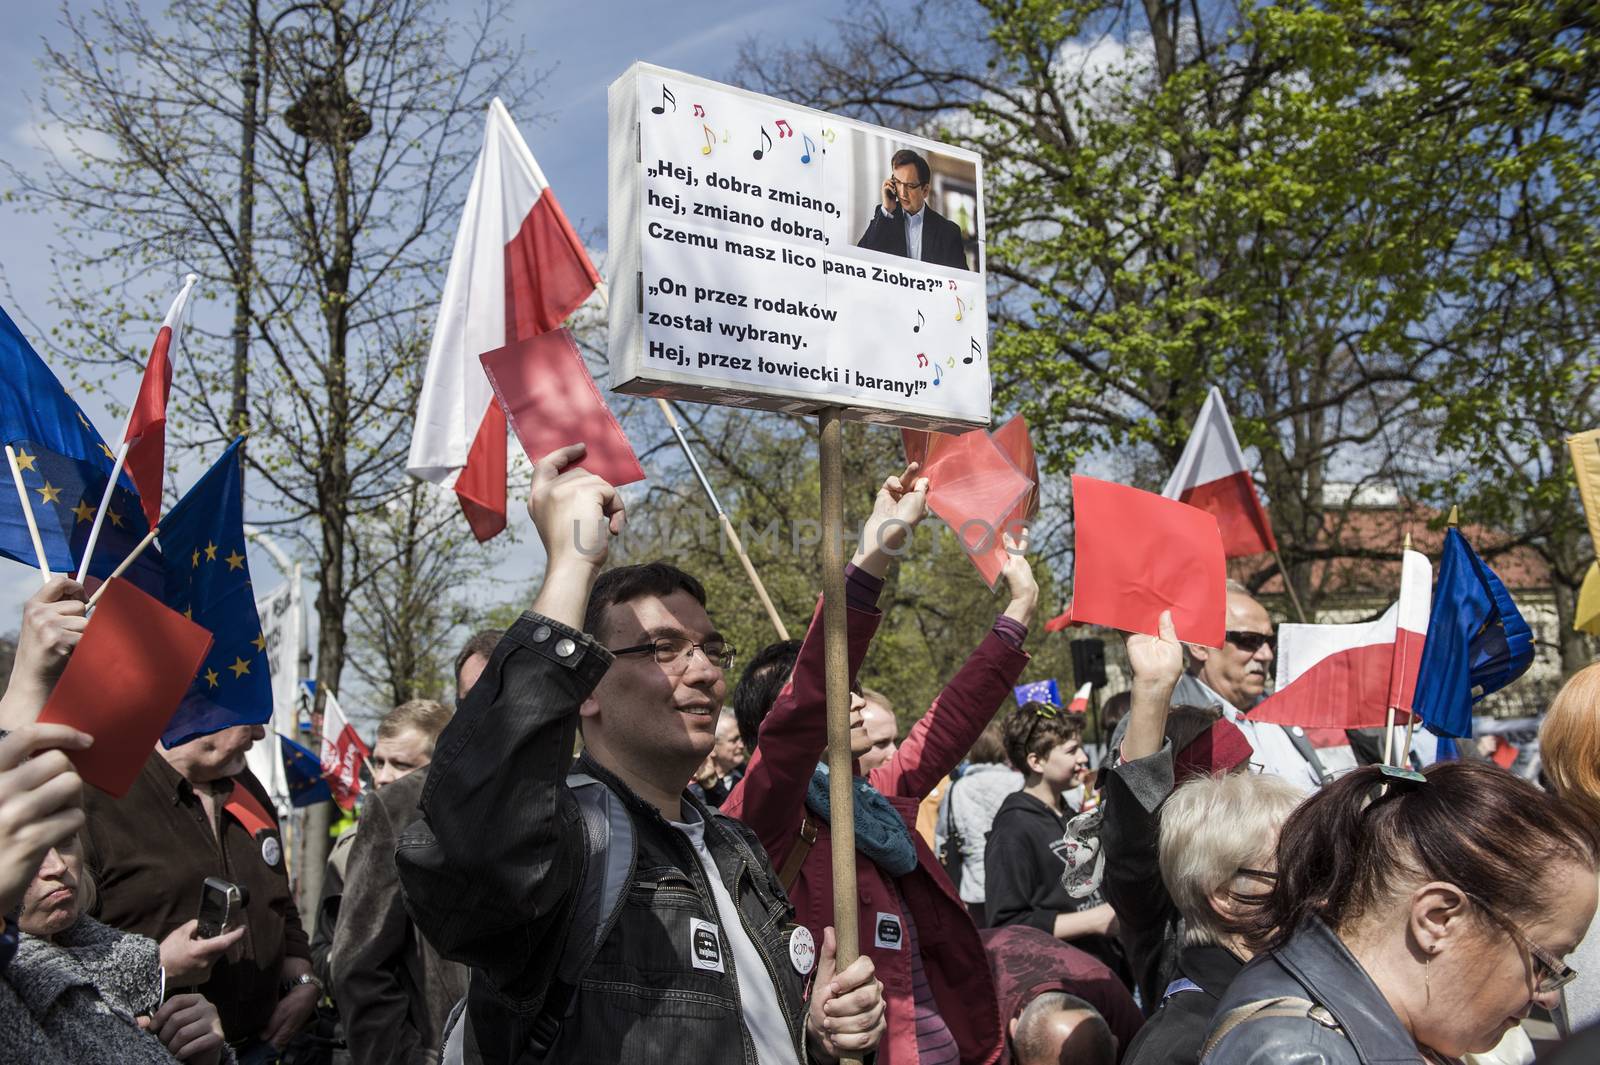 POLAND, Warsaw: Citizens in Warsaw, Poland protested the new Police Act and State Surveillance Law on April 16, 2016.The Police Act allows investigators to access specific private information. The new regulations have been set by the parliament where the vast majority of members are from Jarosław Kaczyński's party Law and Justice (PiS).The demonstrators rallied in front of the Chancellery of the Prime Minister